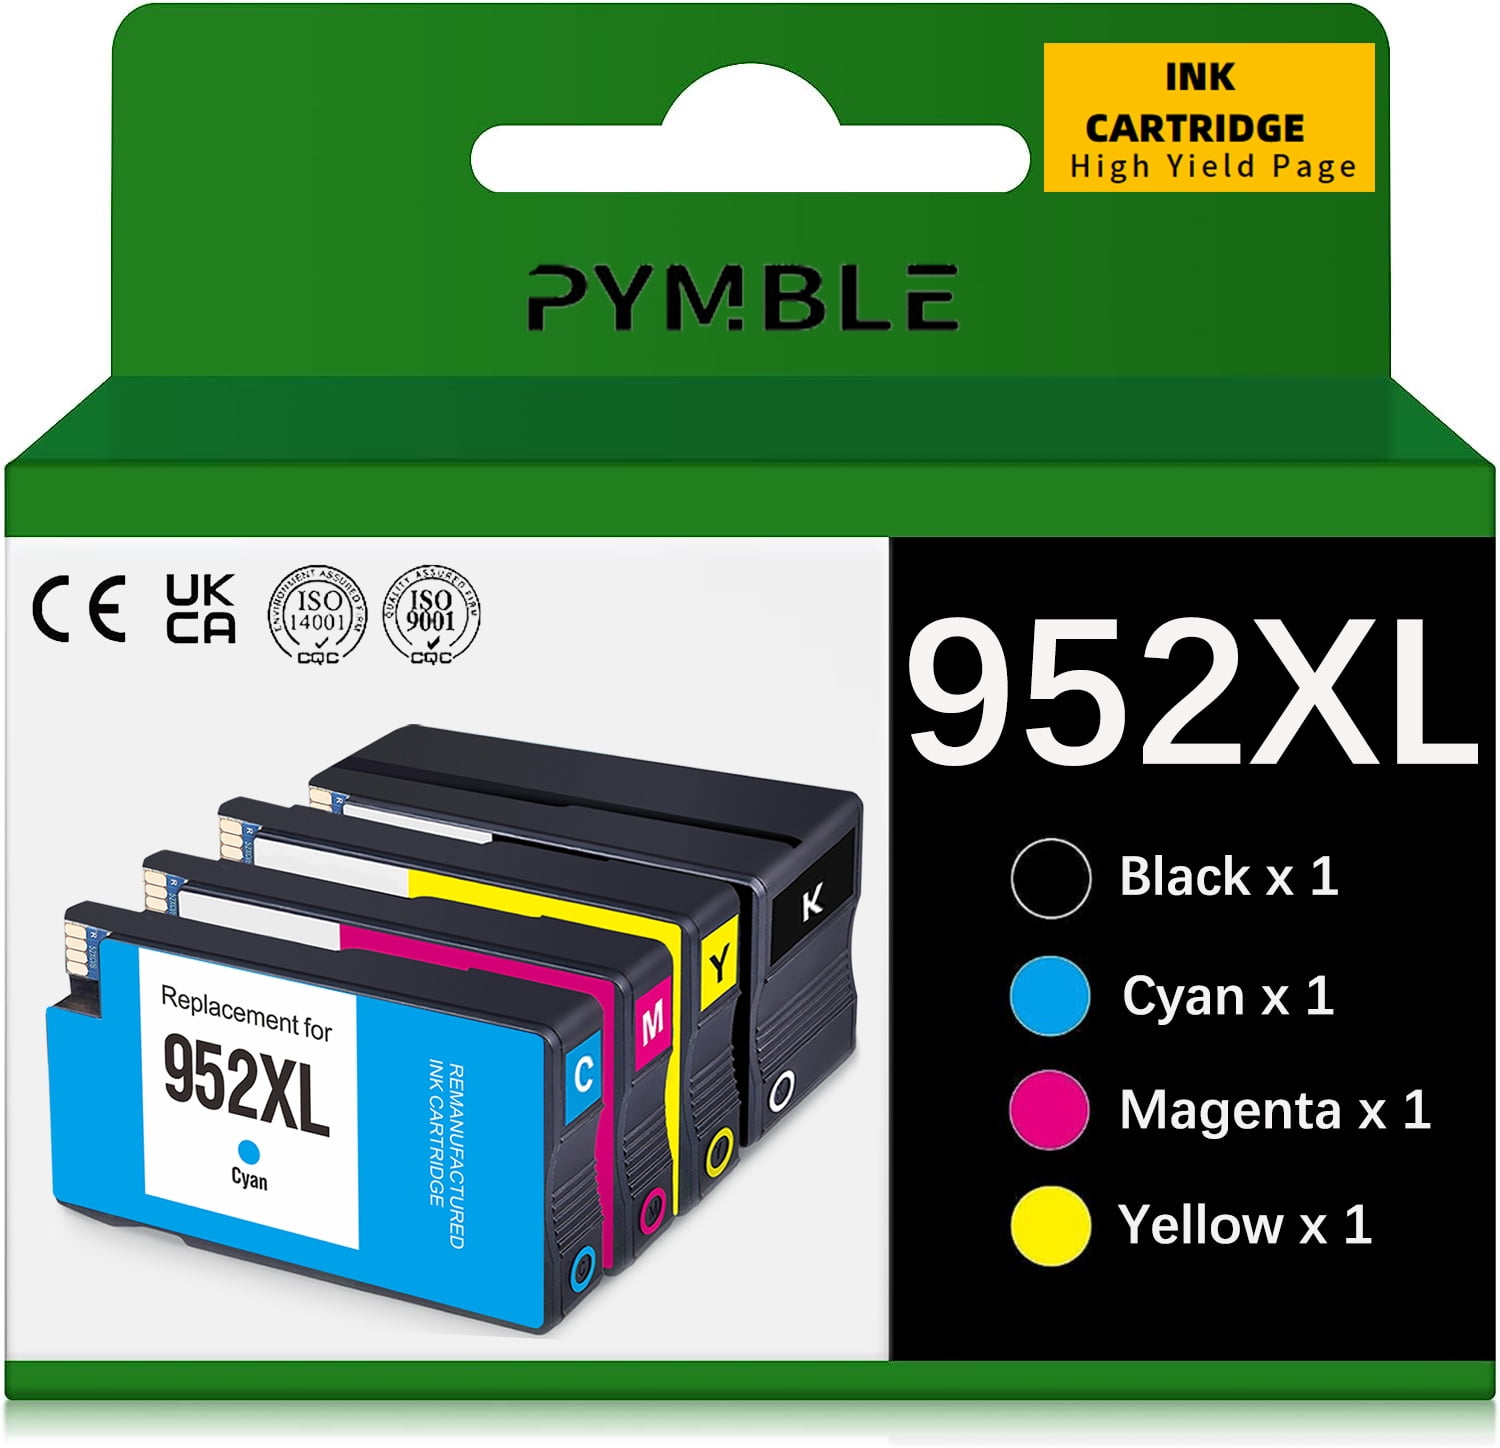 LD Compatible Replacement for HP 952 / 952XL / L0S64AN HY Magenta Ink  Cartridge for OfficeJet 7740, 8702, 8715 & OfficeJet Pro 7740, 8210, 8216,  8717, 8718, 8726, 8736, 8740, 8743, 8744, 8745 